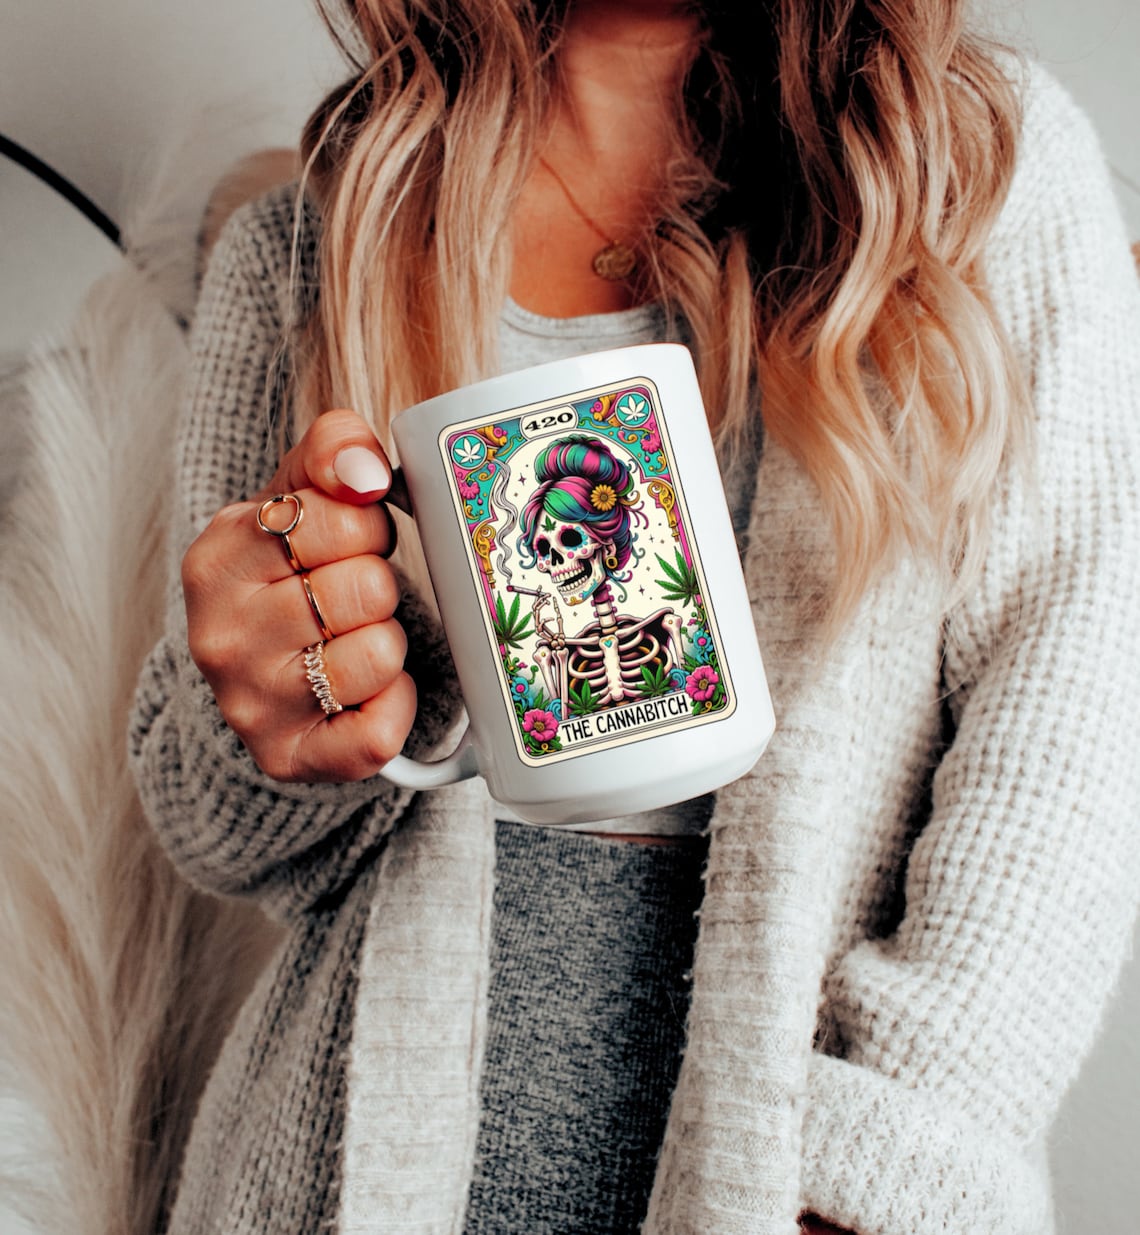 Then CanniBitch Skeleton Tarot Reading Cards Coffee Mug